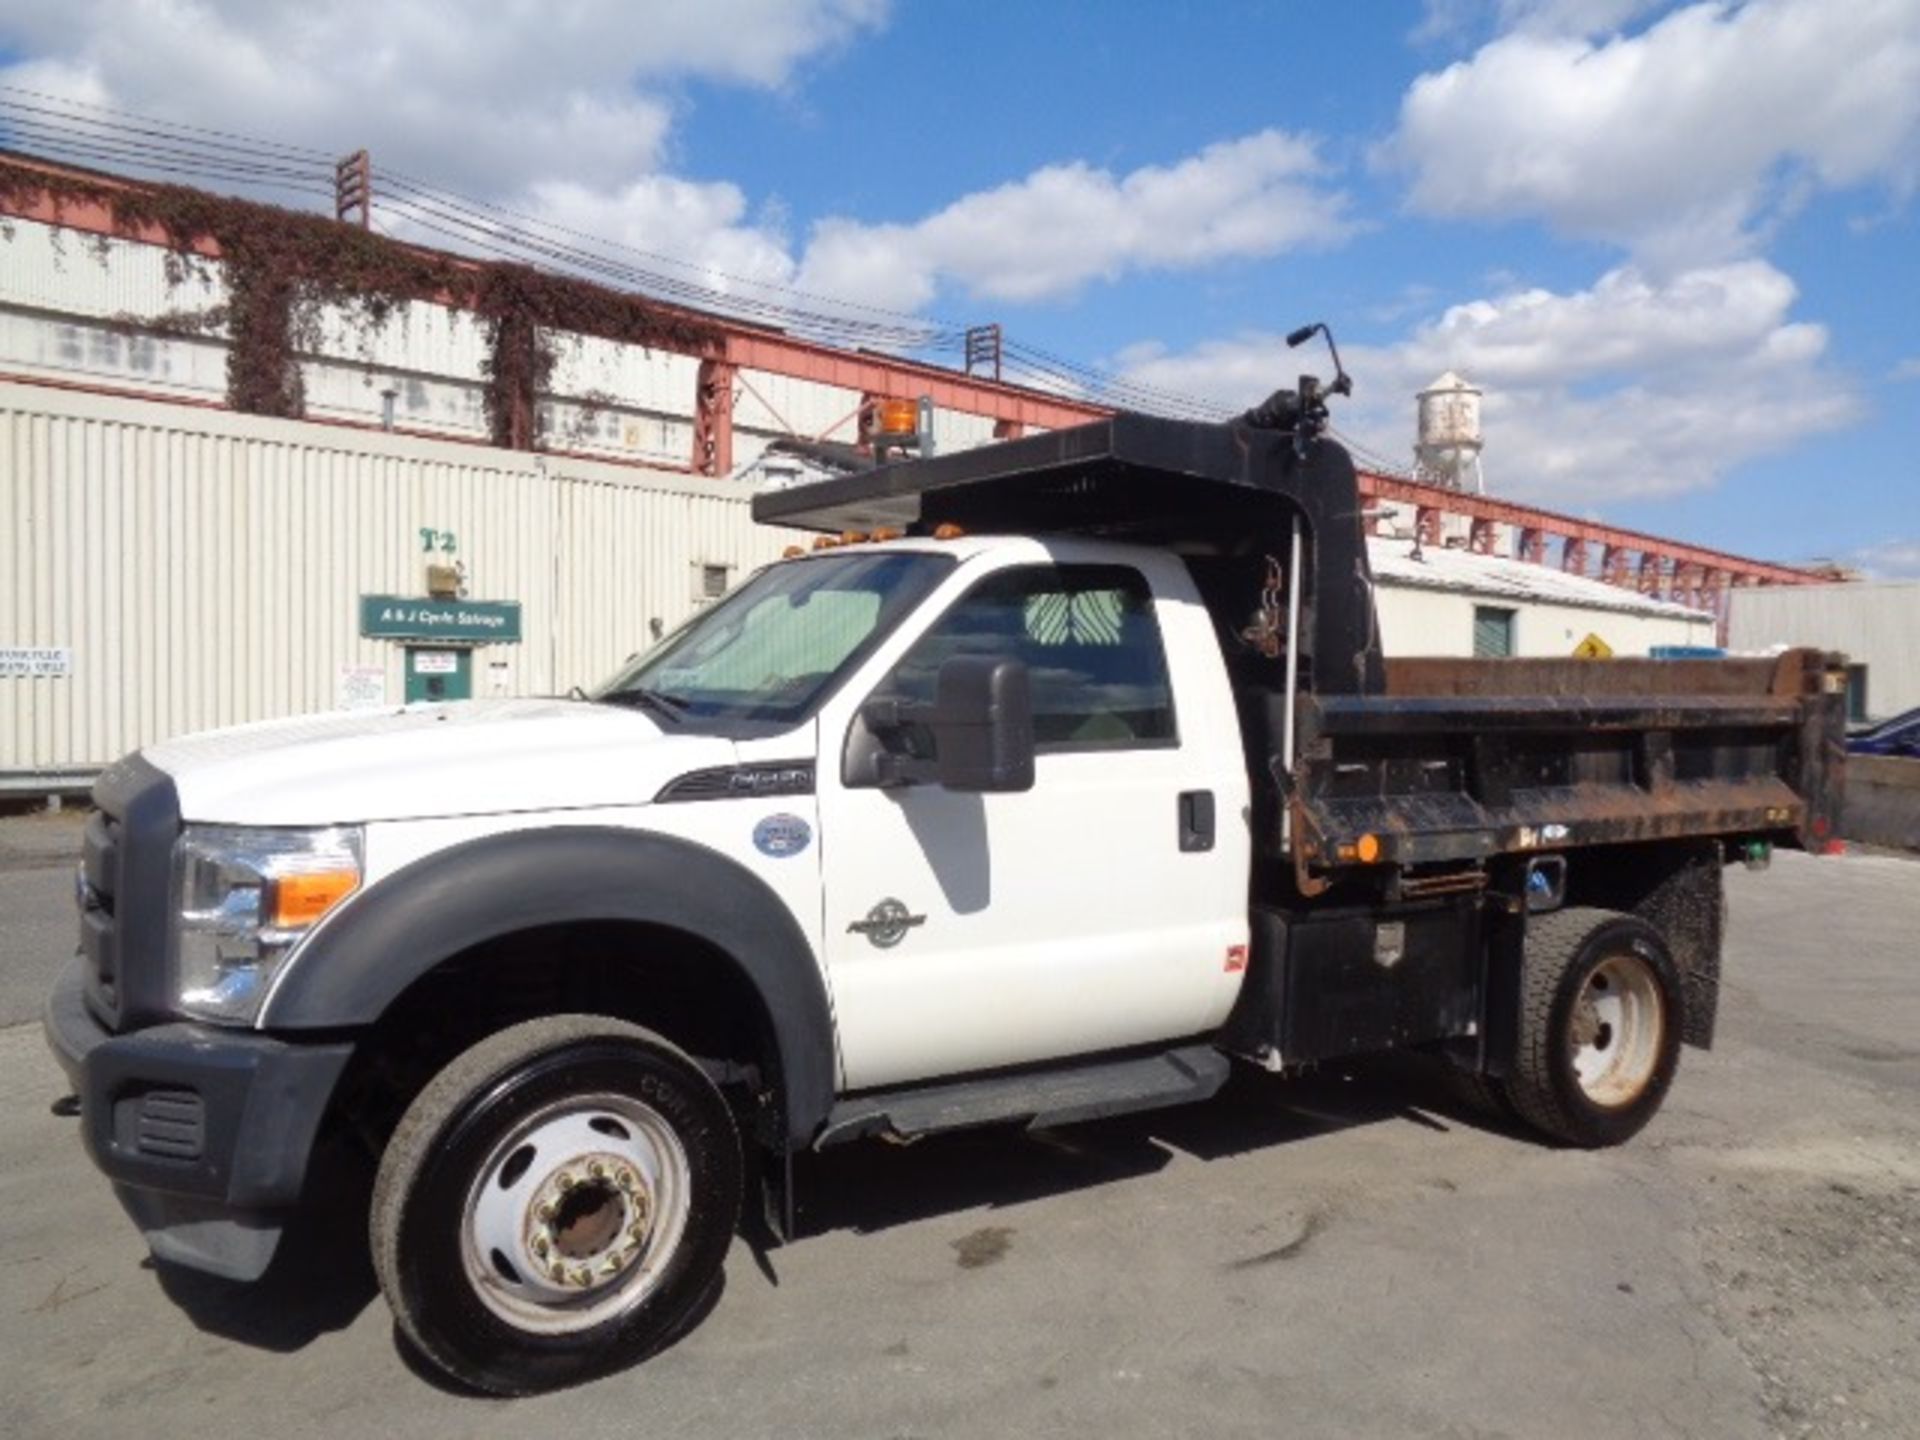 2012 Ford F550 Dump Truck - Image 8 of 19